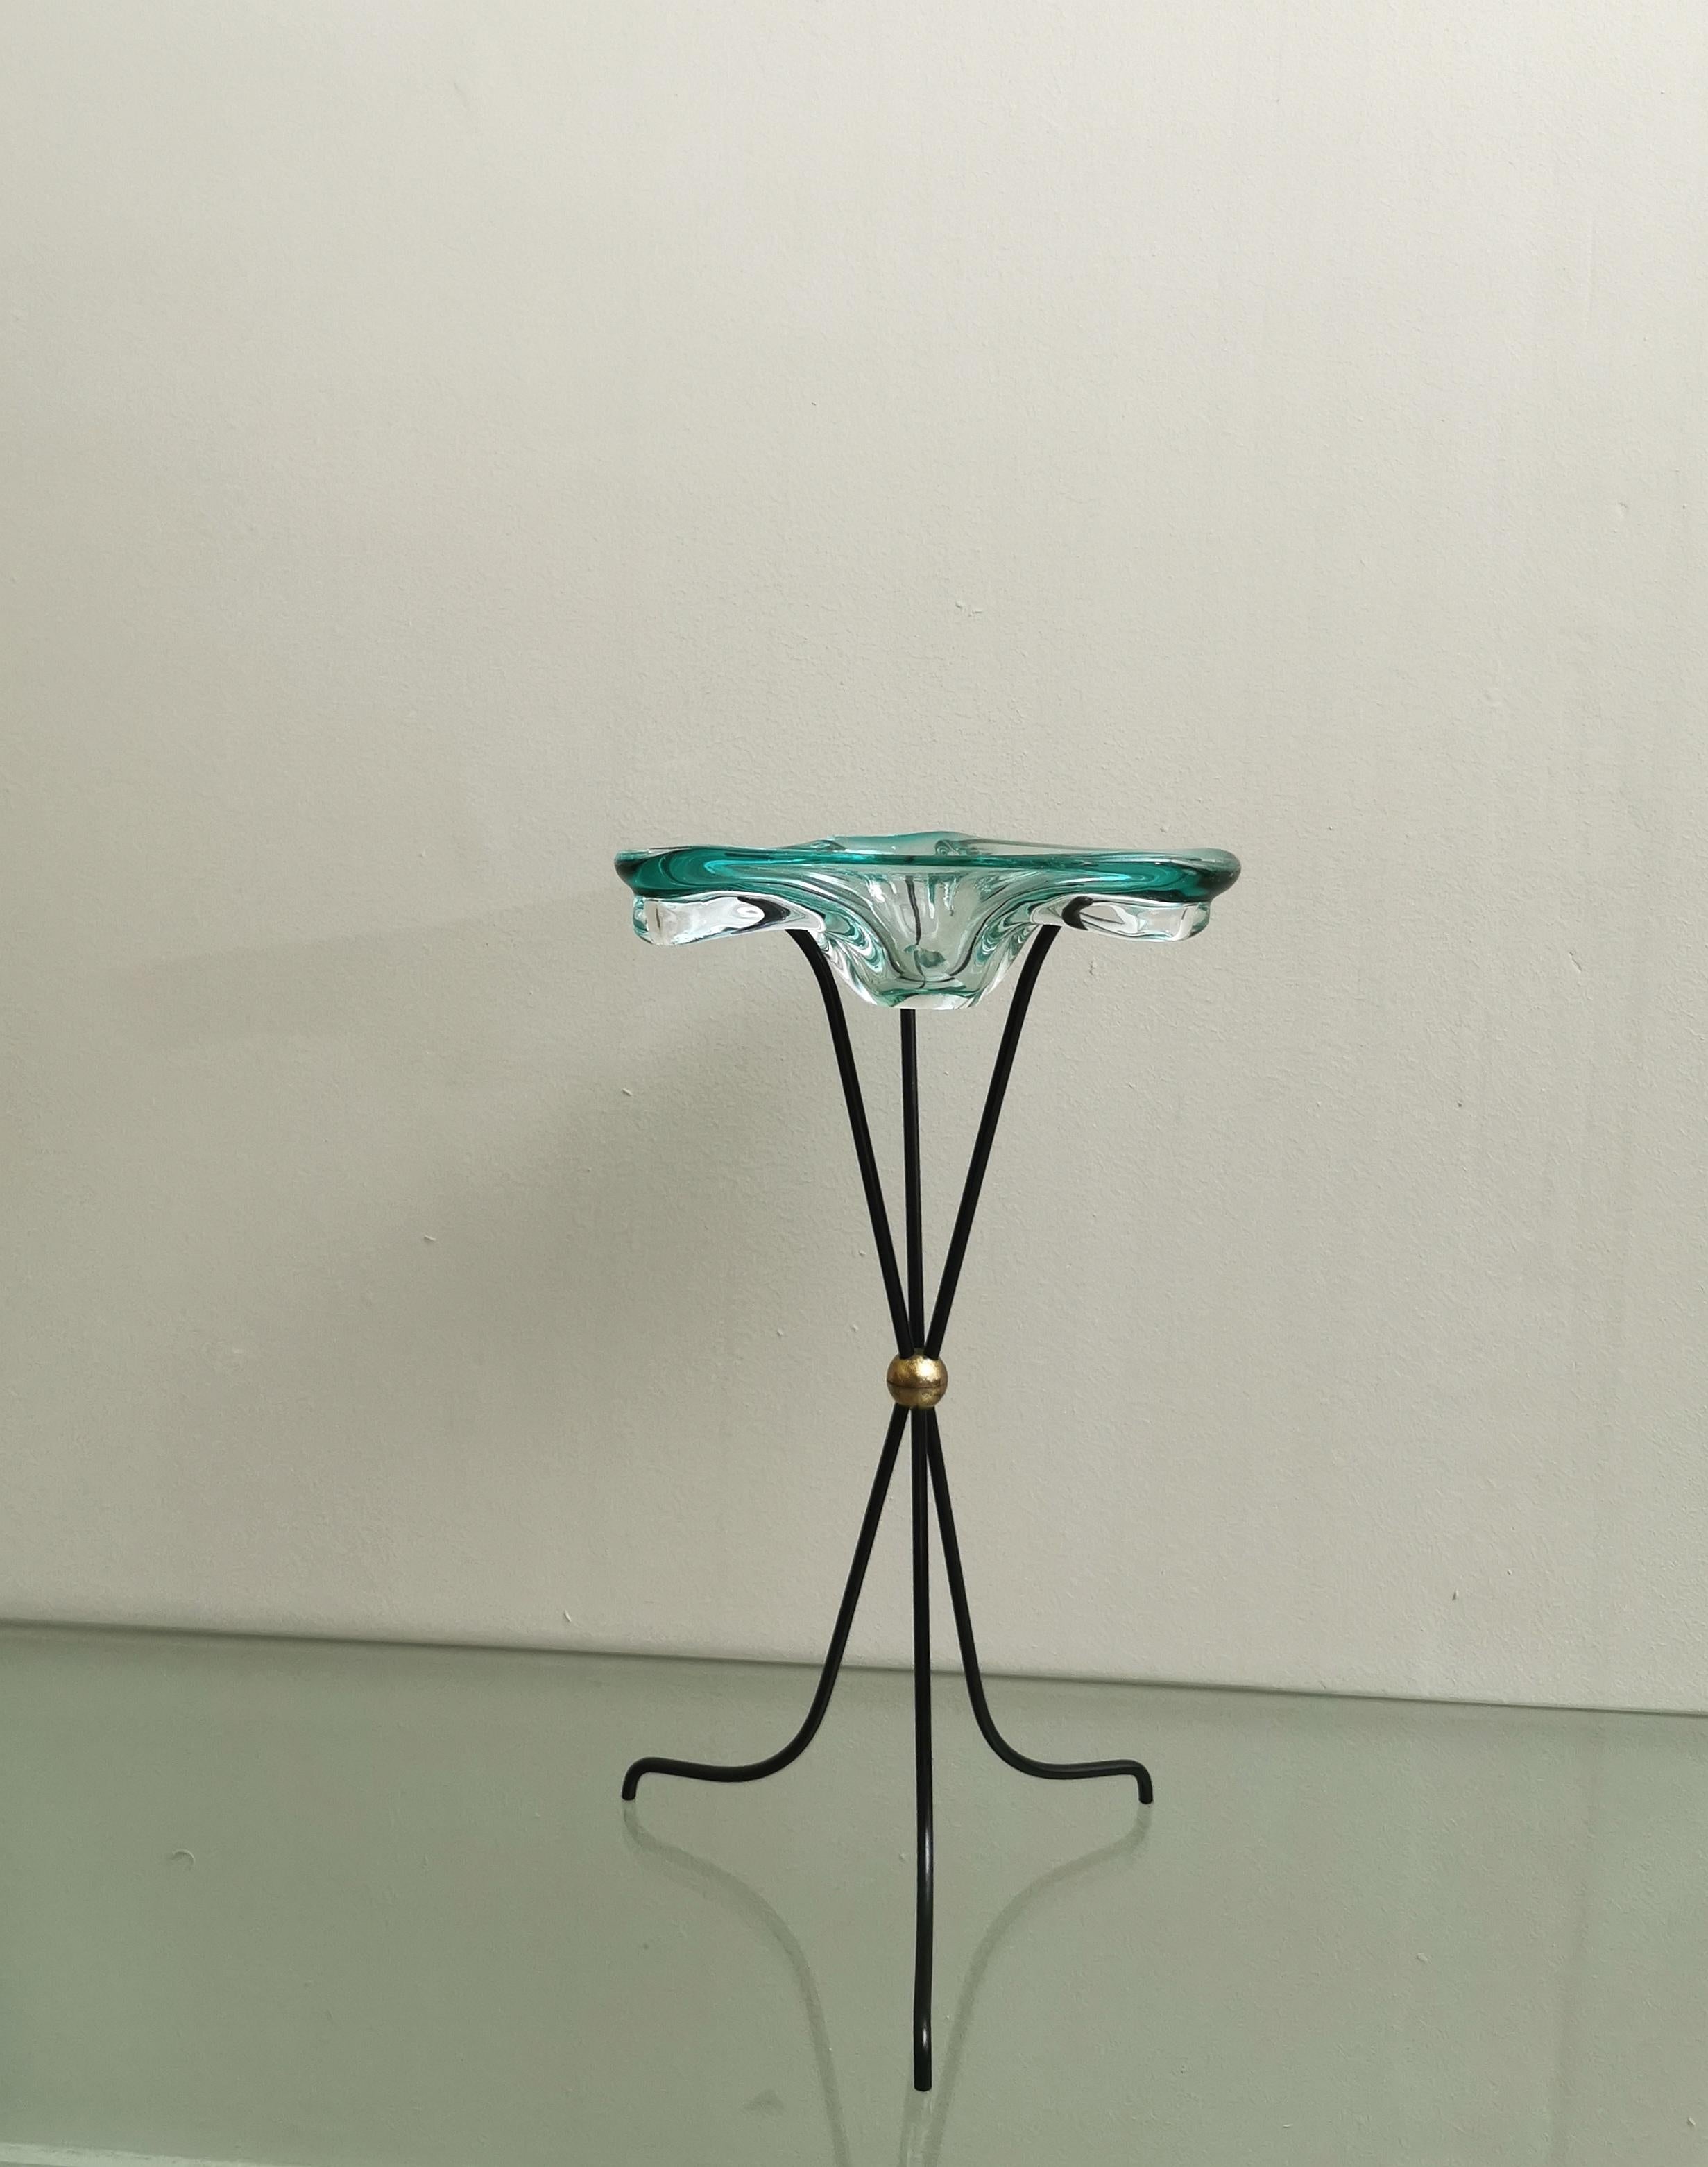 Ashtray designed by the Italian designer Albano Poli and produced in the 70s. The triangular shaped ashtray with rounded corners is in handmade Murano glass in the shade of nile green with a 3-foot structure in black enamelled metal with brass